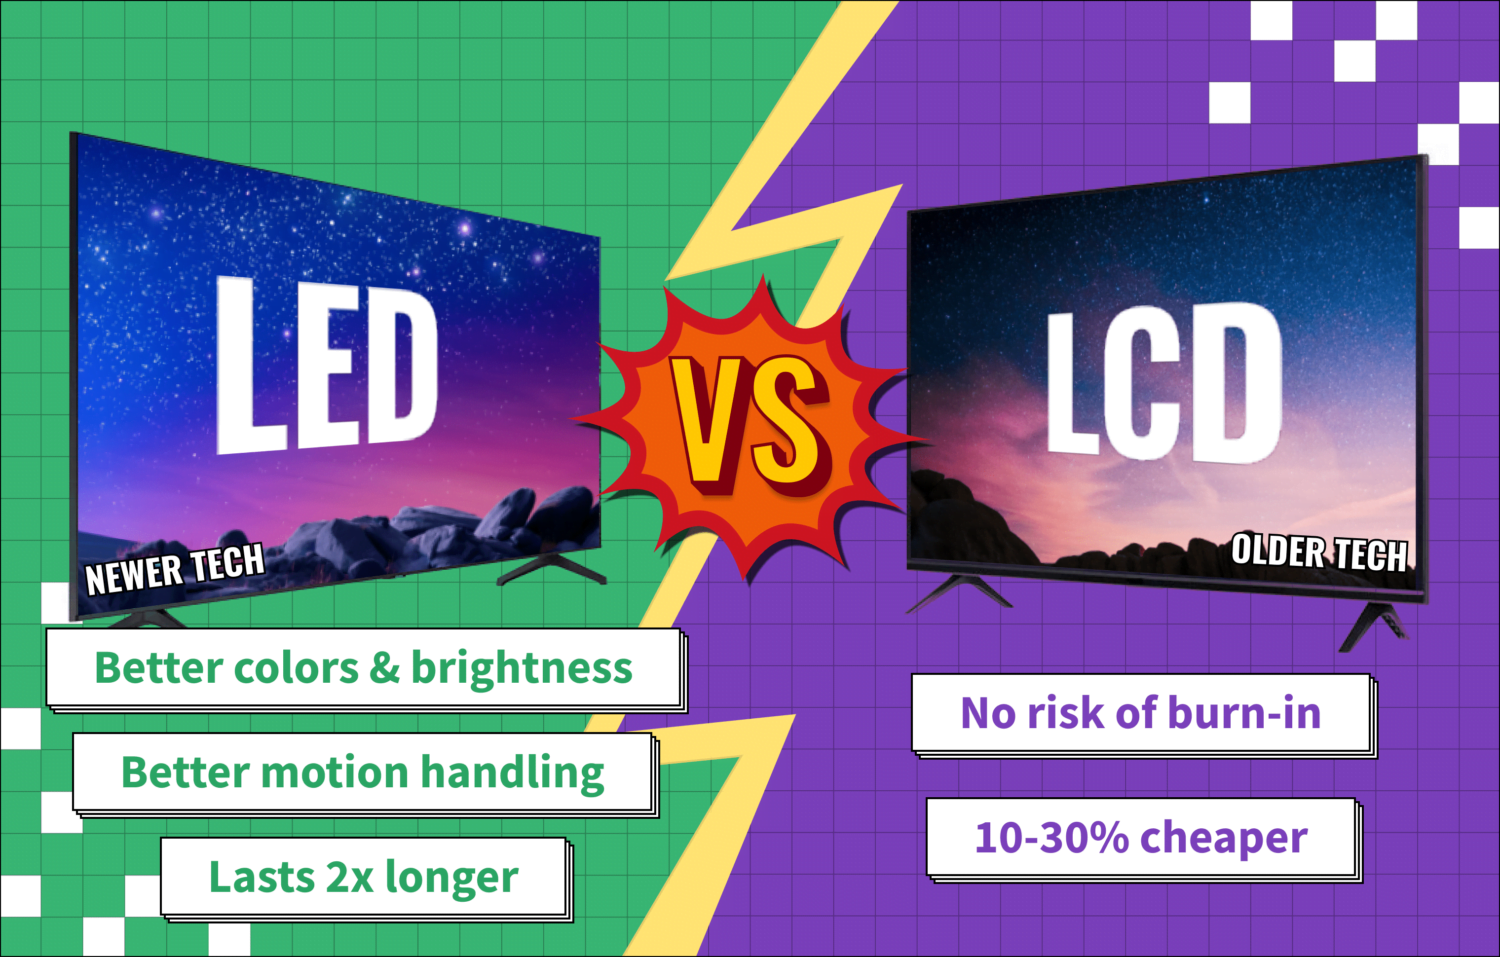 led vs lcd tv featured image with pros